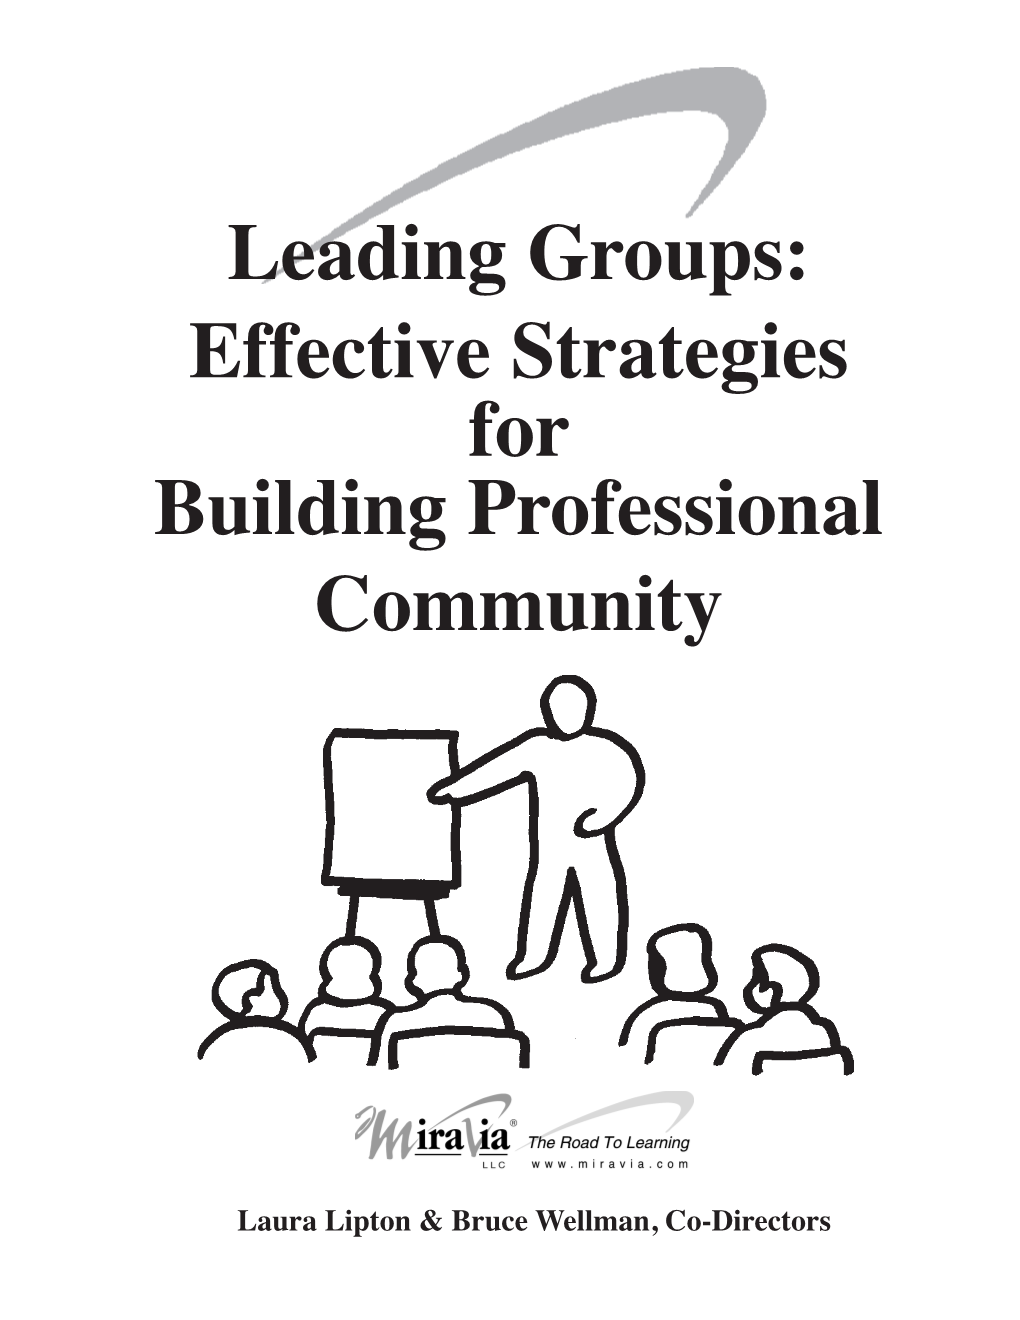 Leading Groups: Effective Strategies for Building Professional Community